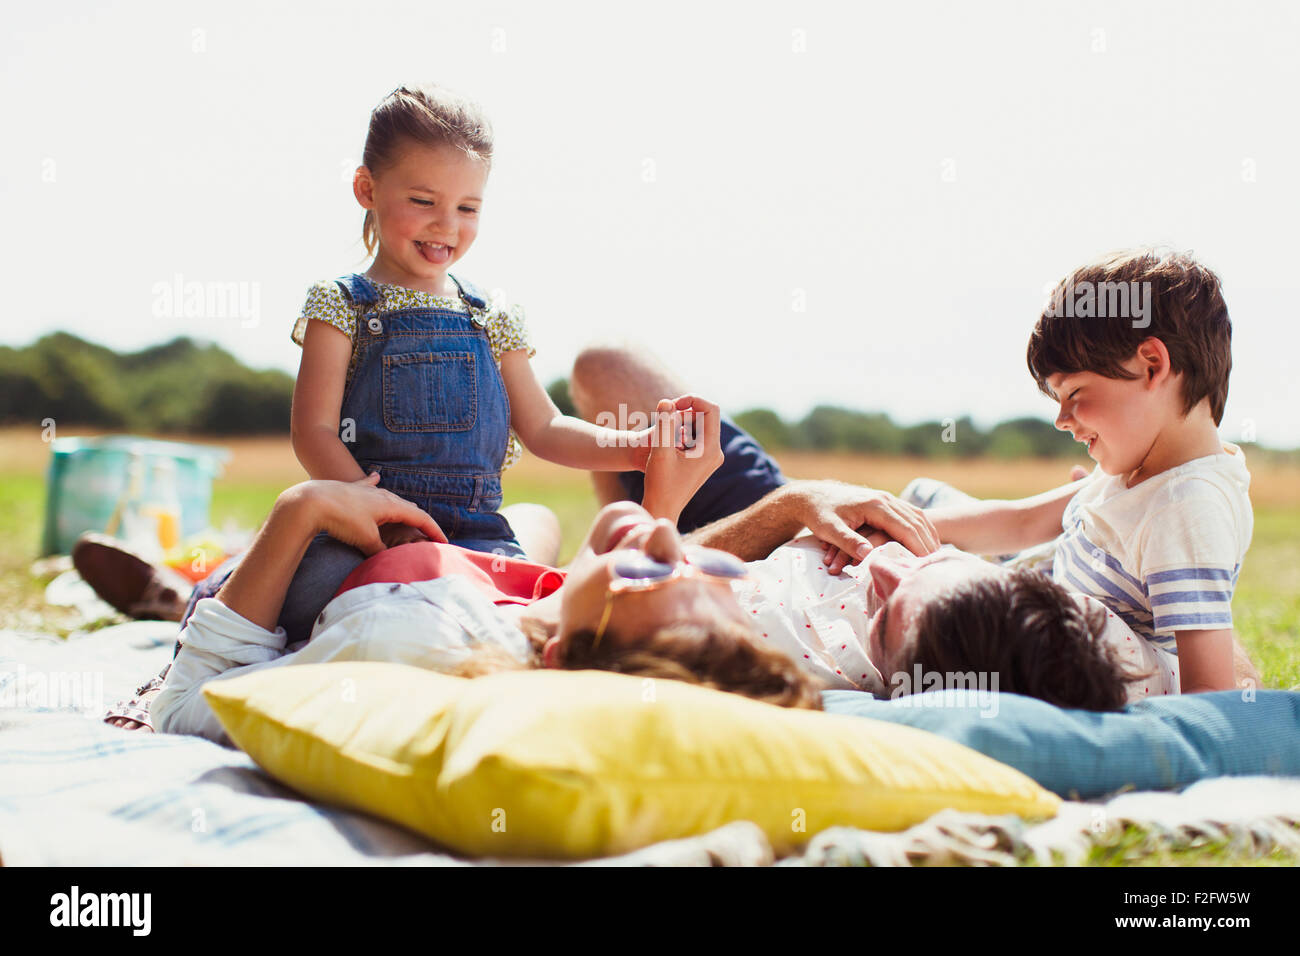 Family relaxing on blanket in sunny field Stock Photo